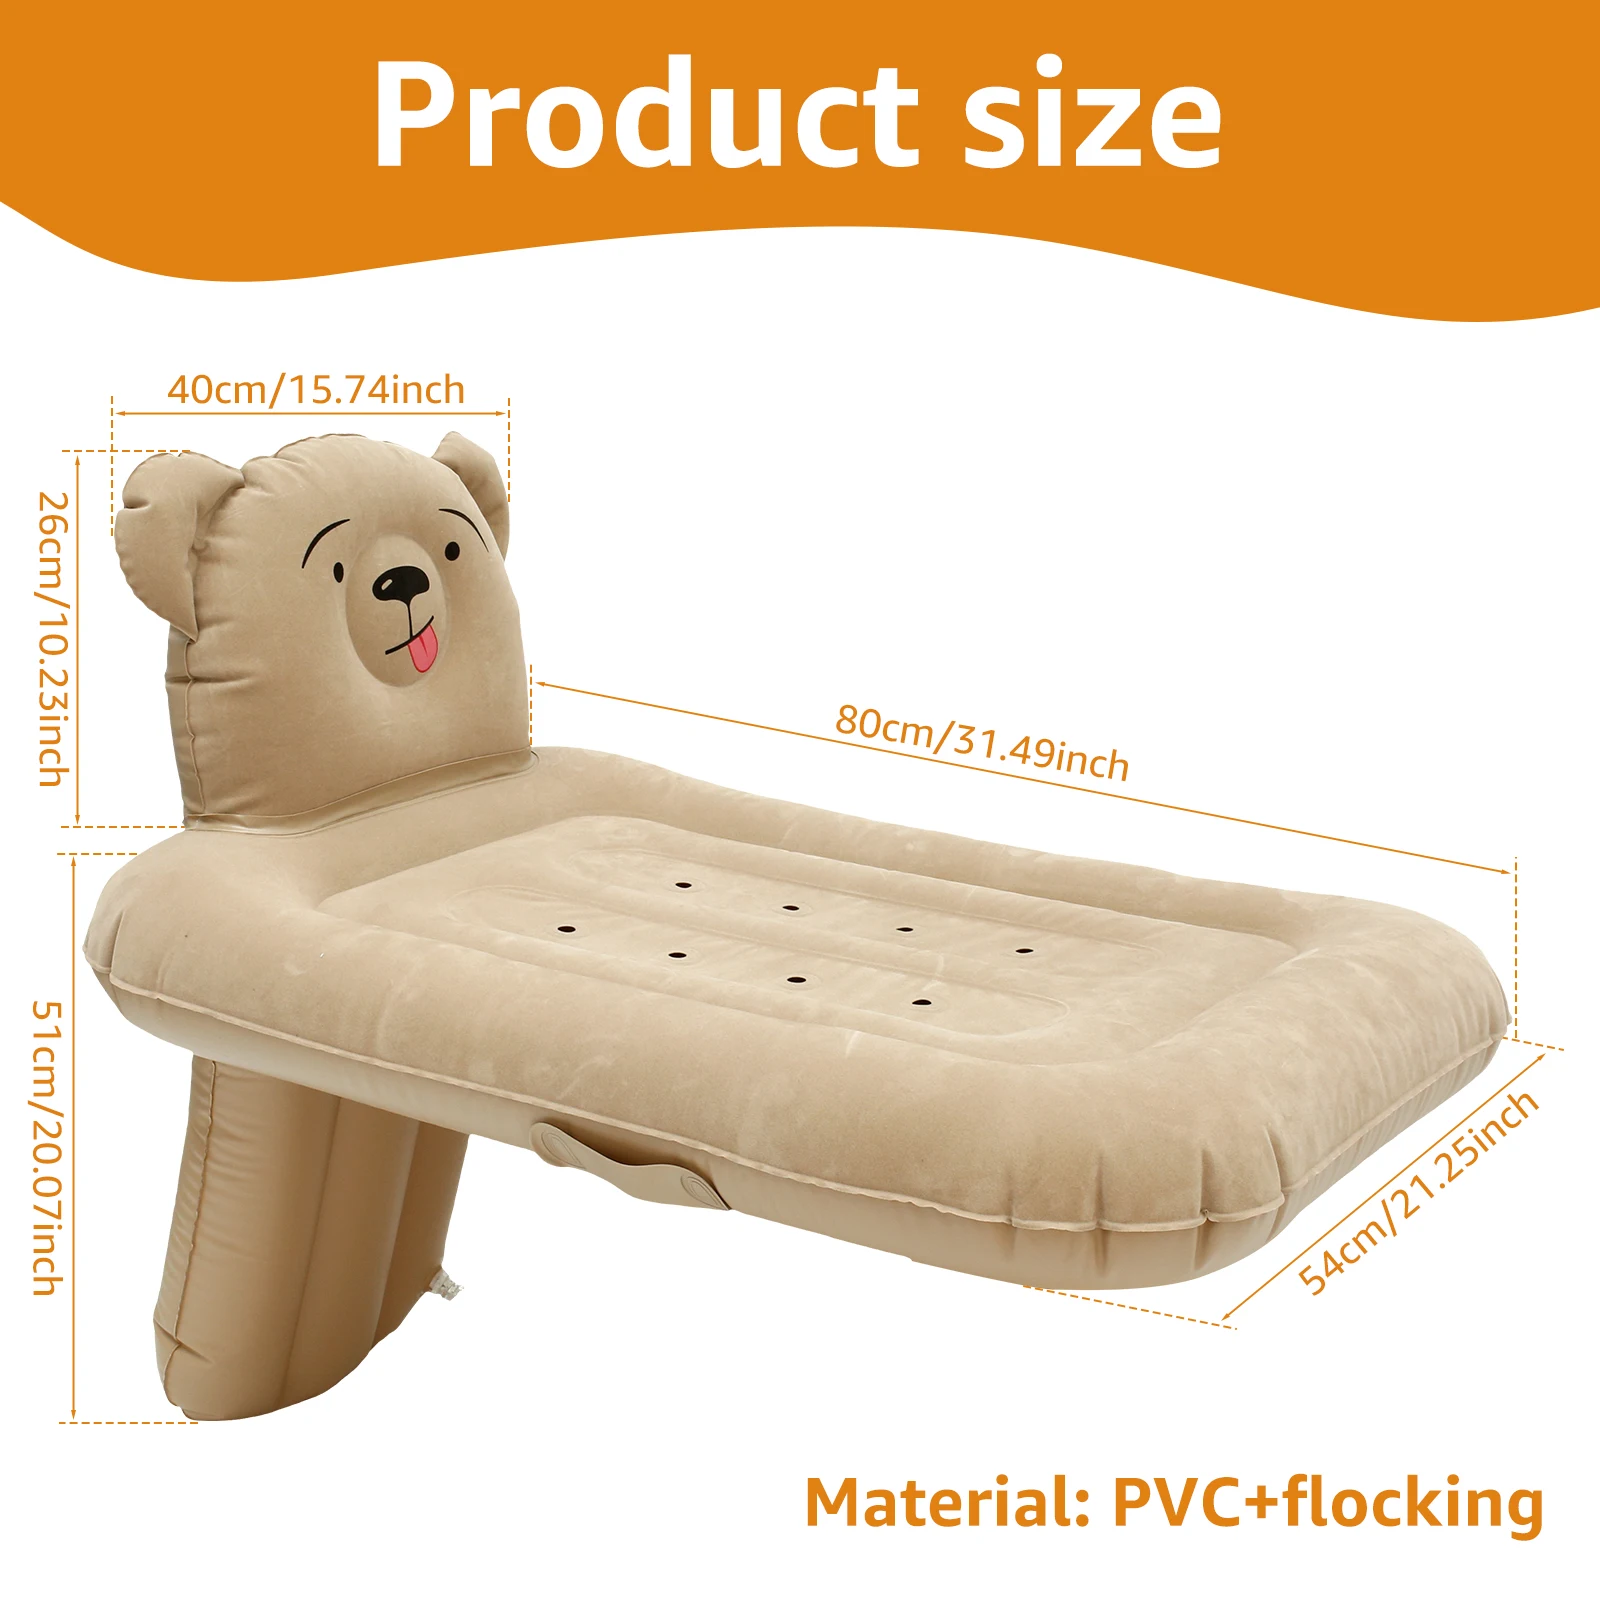 Inflatable Airplane Bed Soft Airplane Toddler Bed Portable Flyaway Kids Bed Airplane Puncture Proof Infant Airplane Bed with